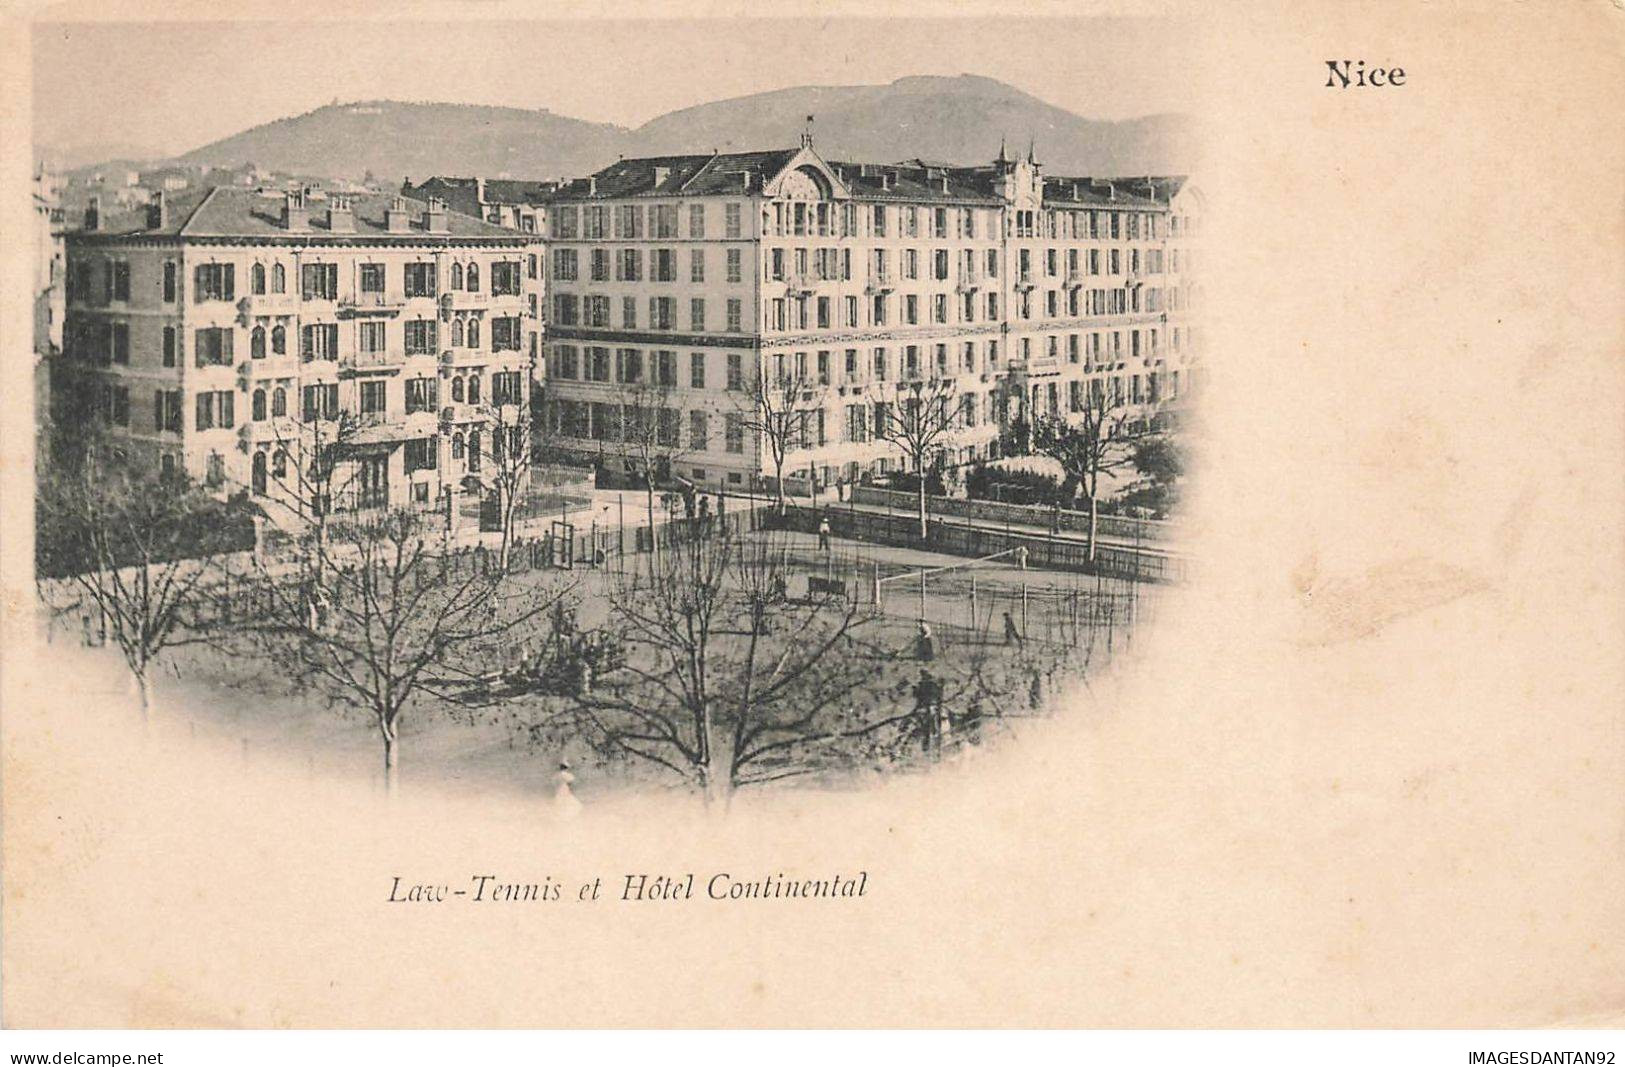 06 NICE AI#DC034 LAW-TENNIS ET HOTEL CONTINENTAL - Pubs, Hotels And Restaurants